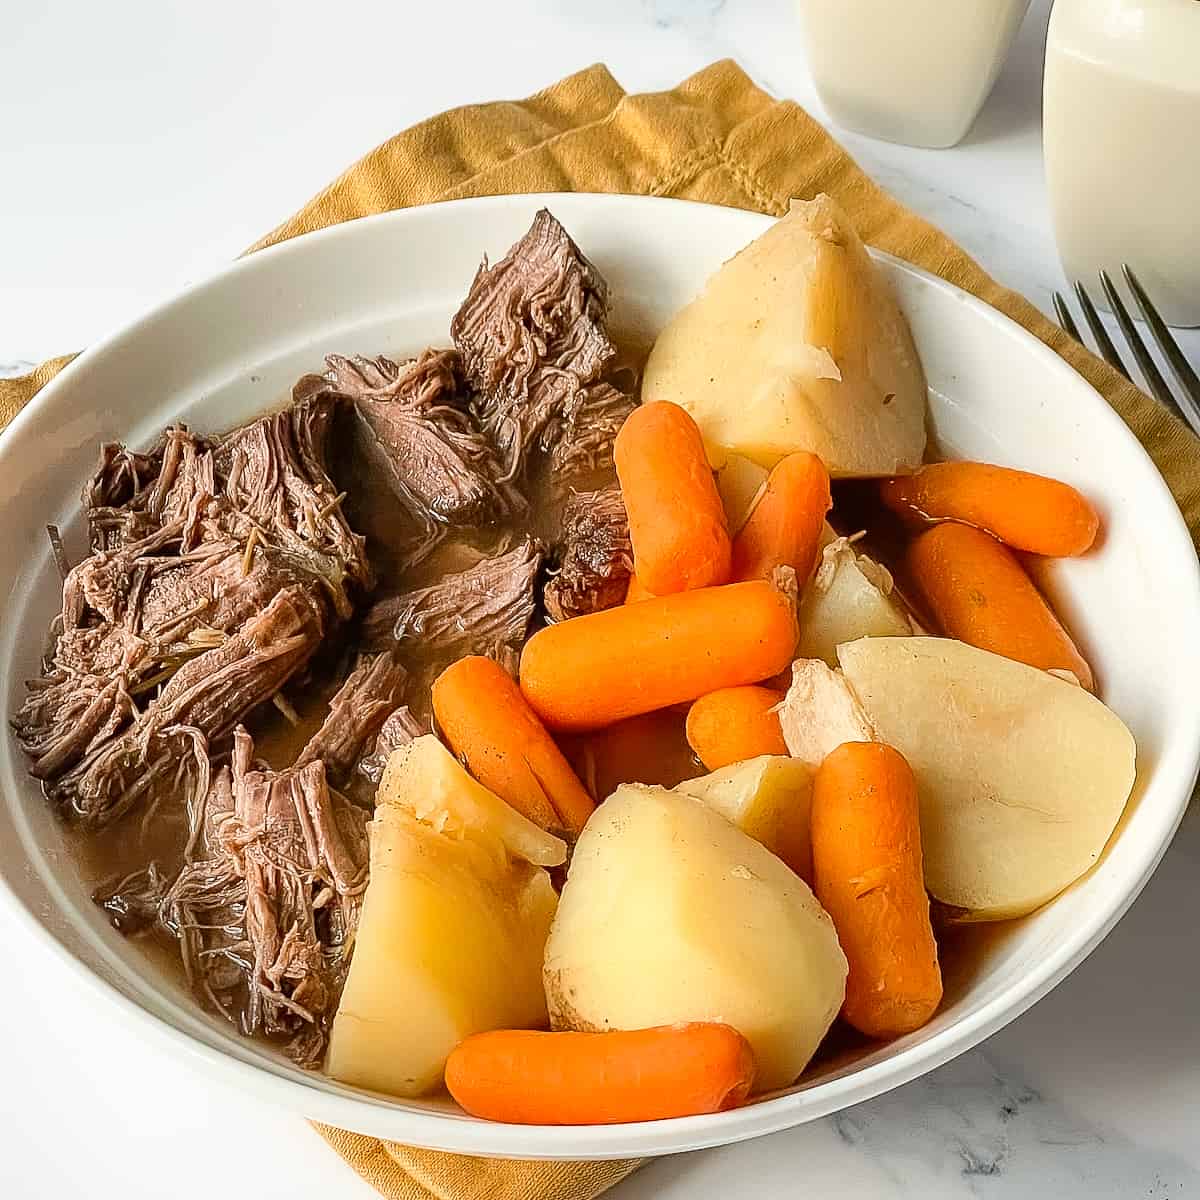 Instant Pot Venison Roast with potatoes and carrots in a white bowl